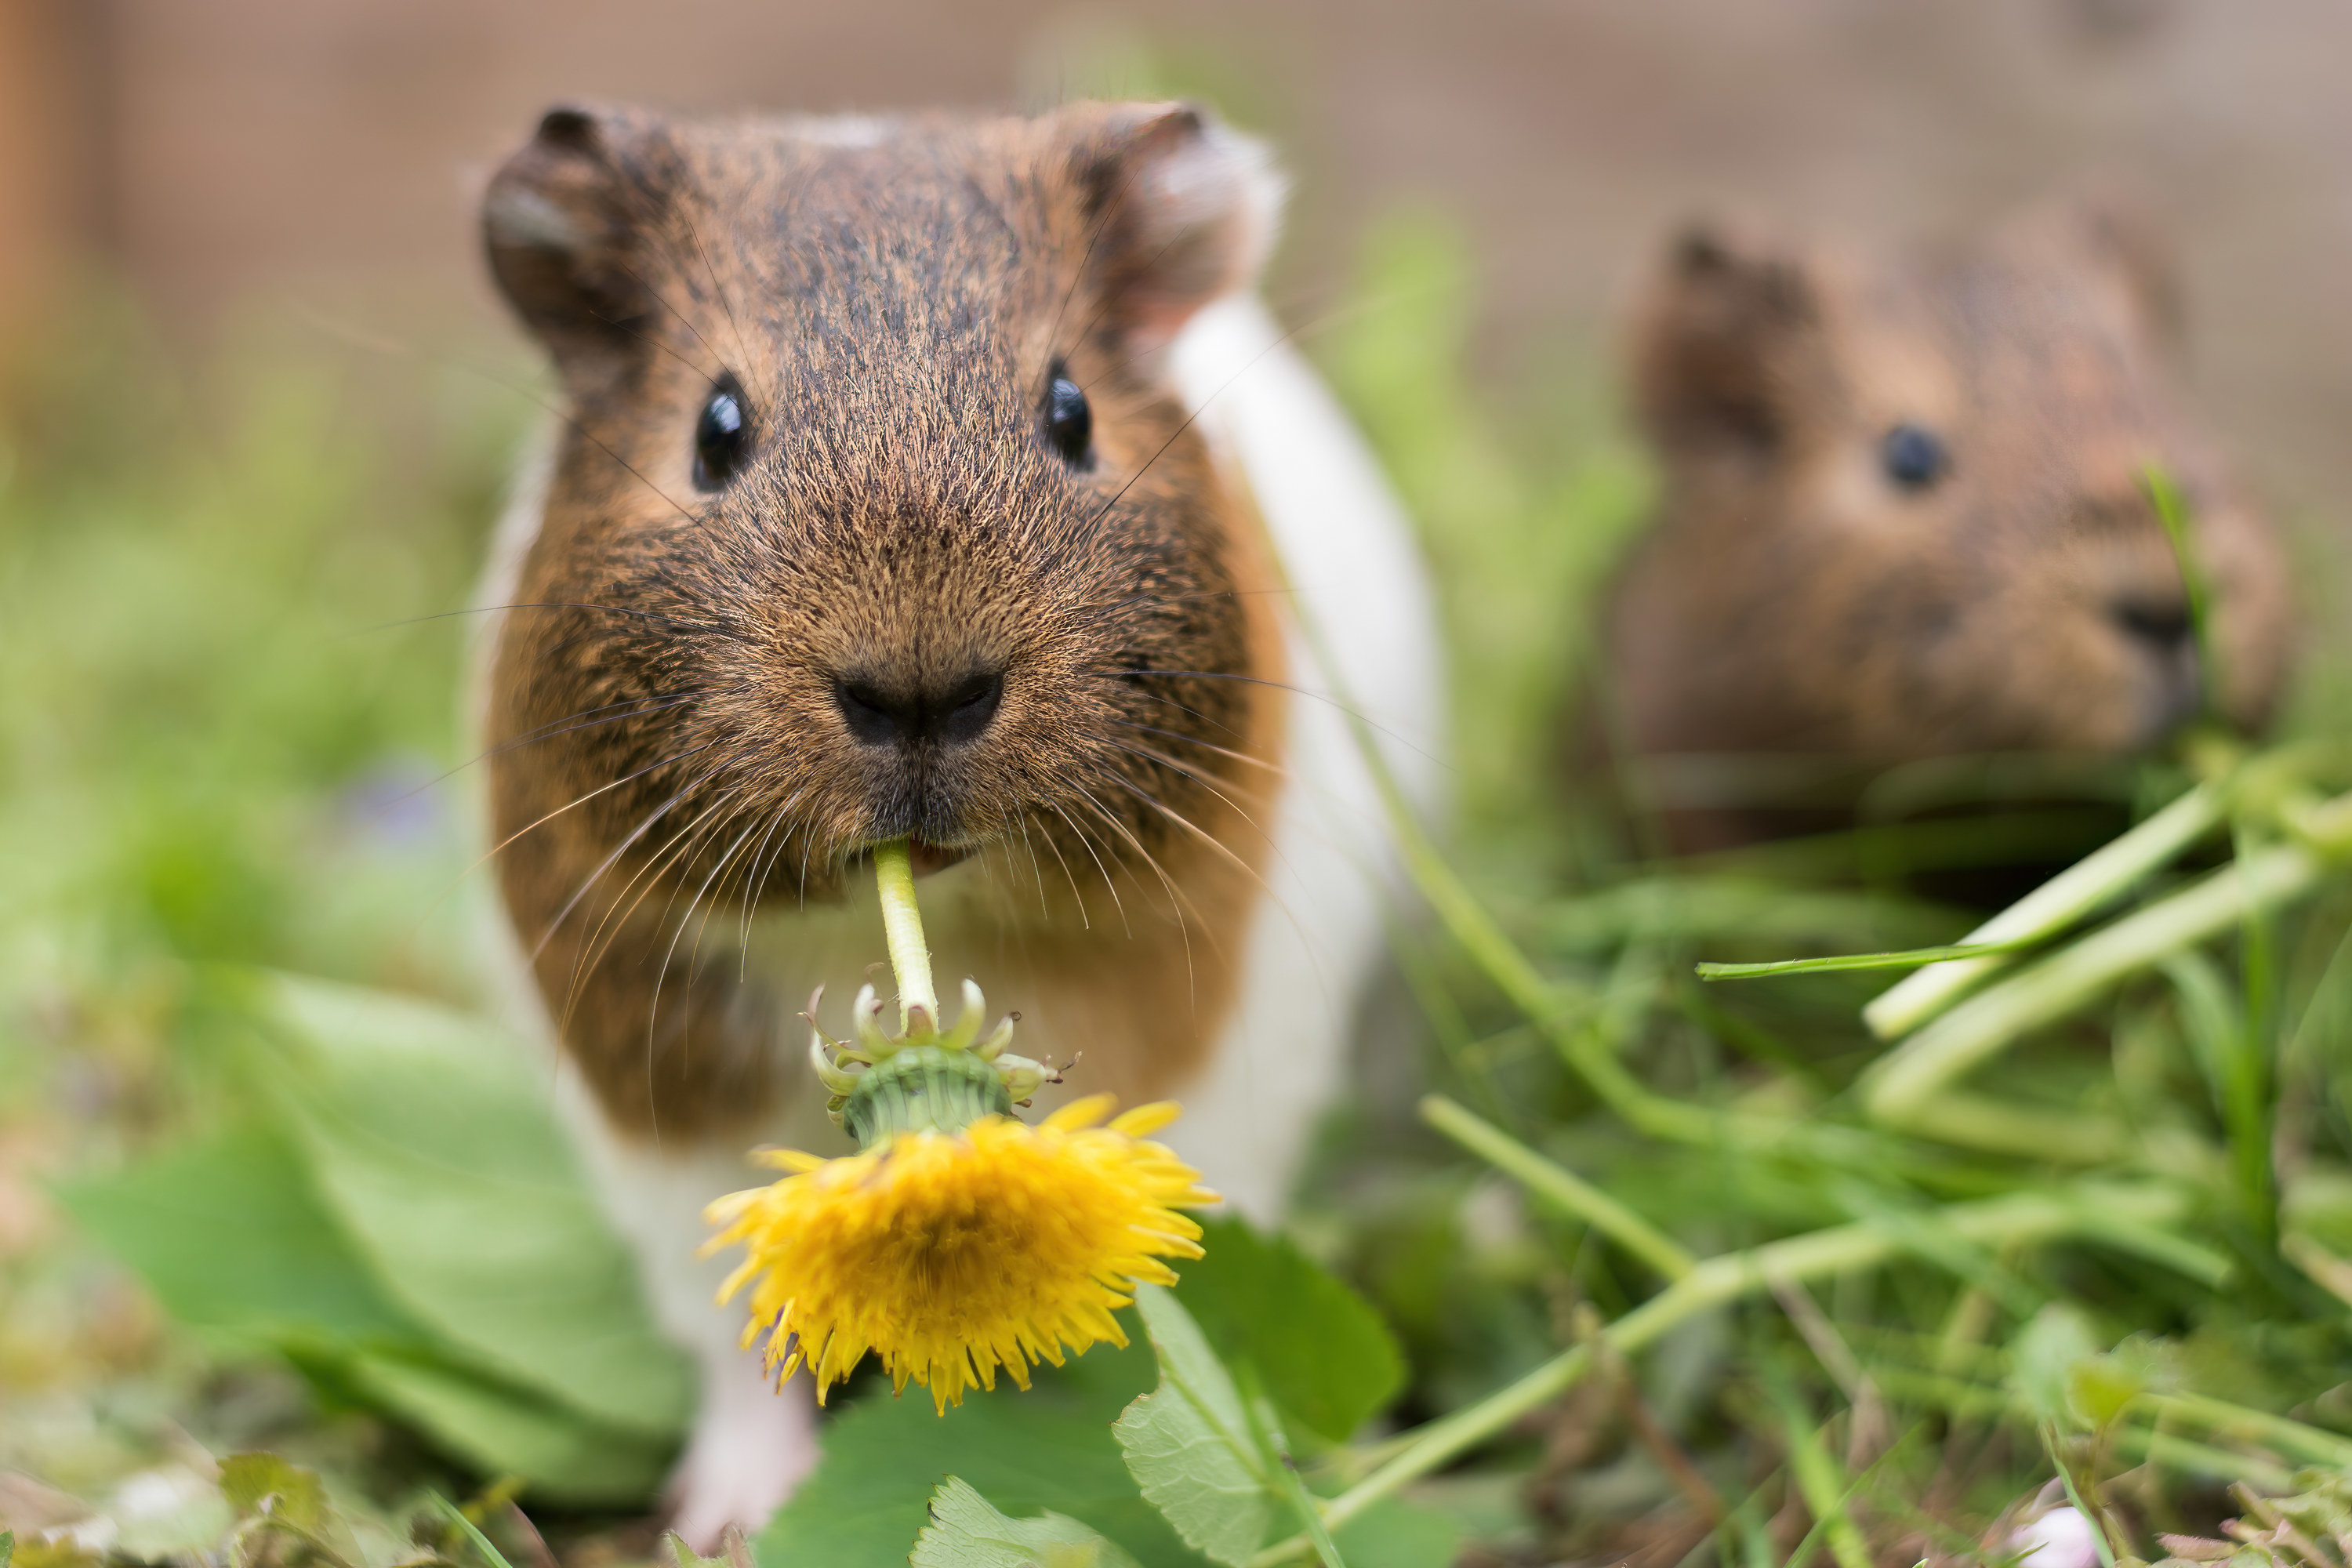 Two guinea pigs eating grass